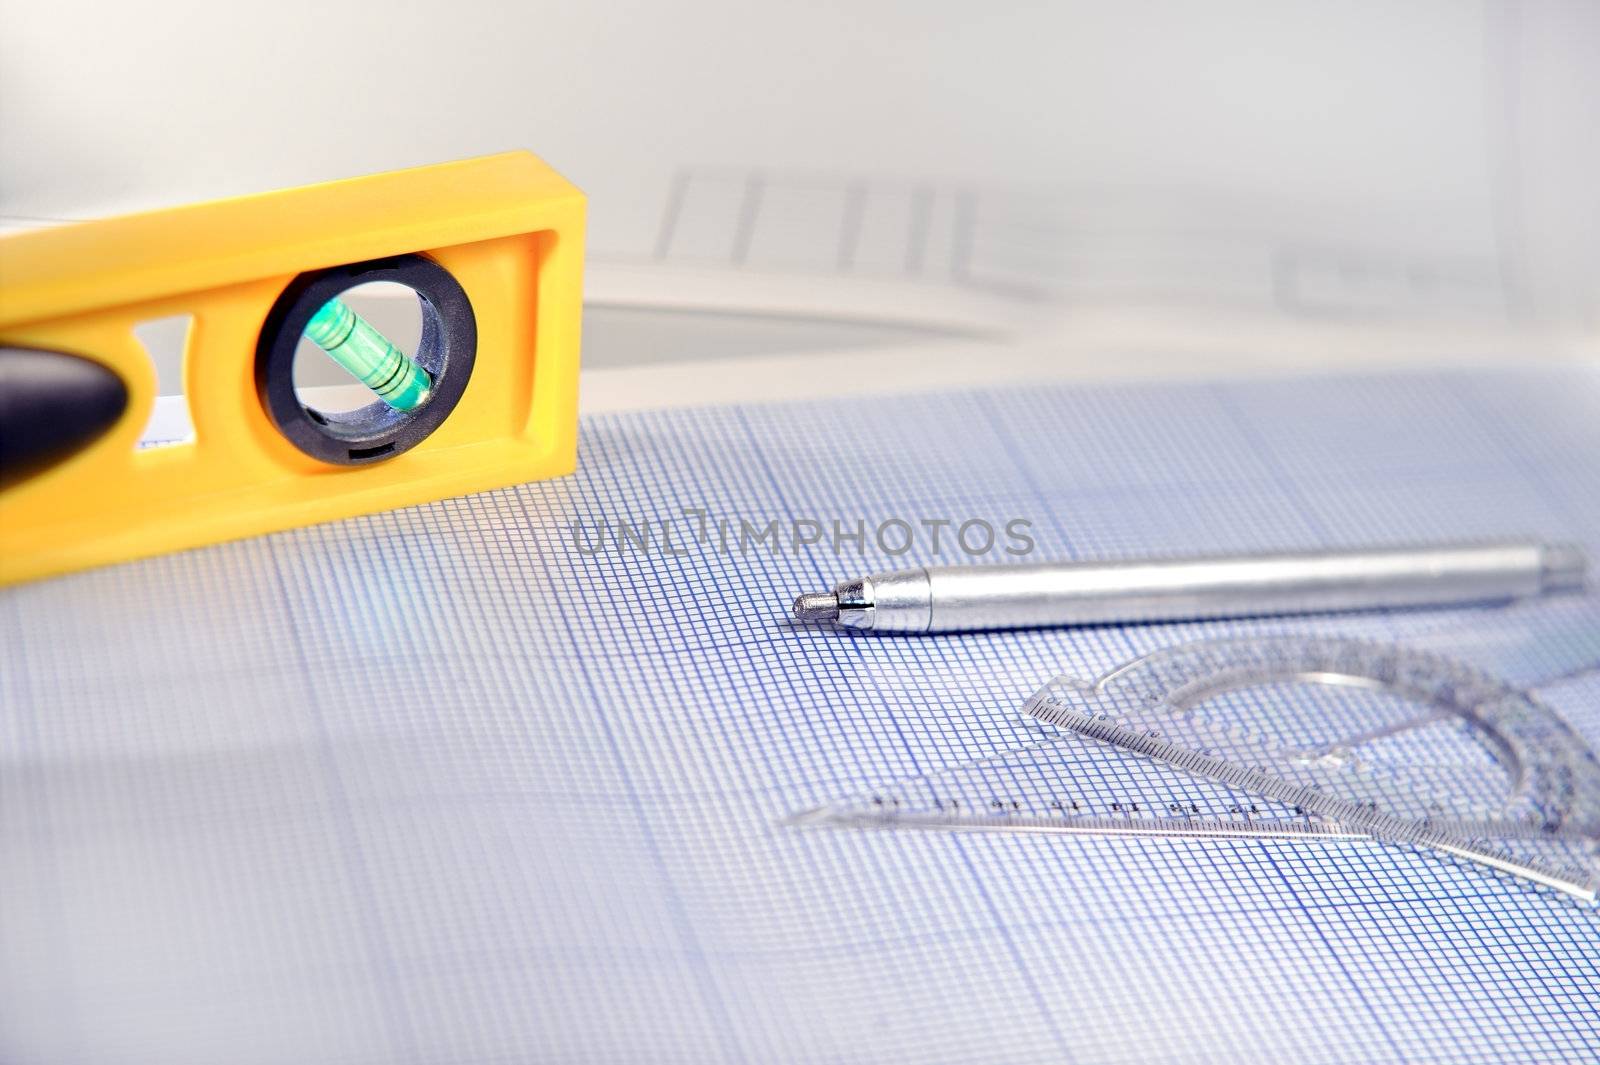 Pencil, graph paper, water level and ruler. Workplace Designer. Shot with shallow depth of field. Selective focus.